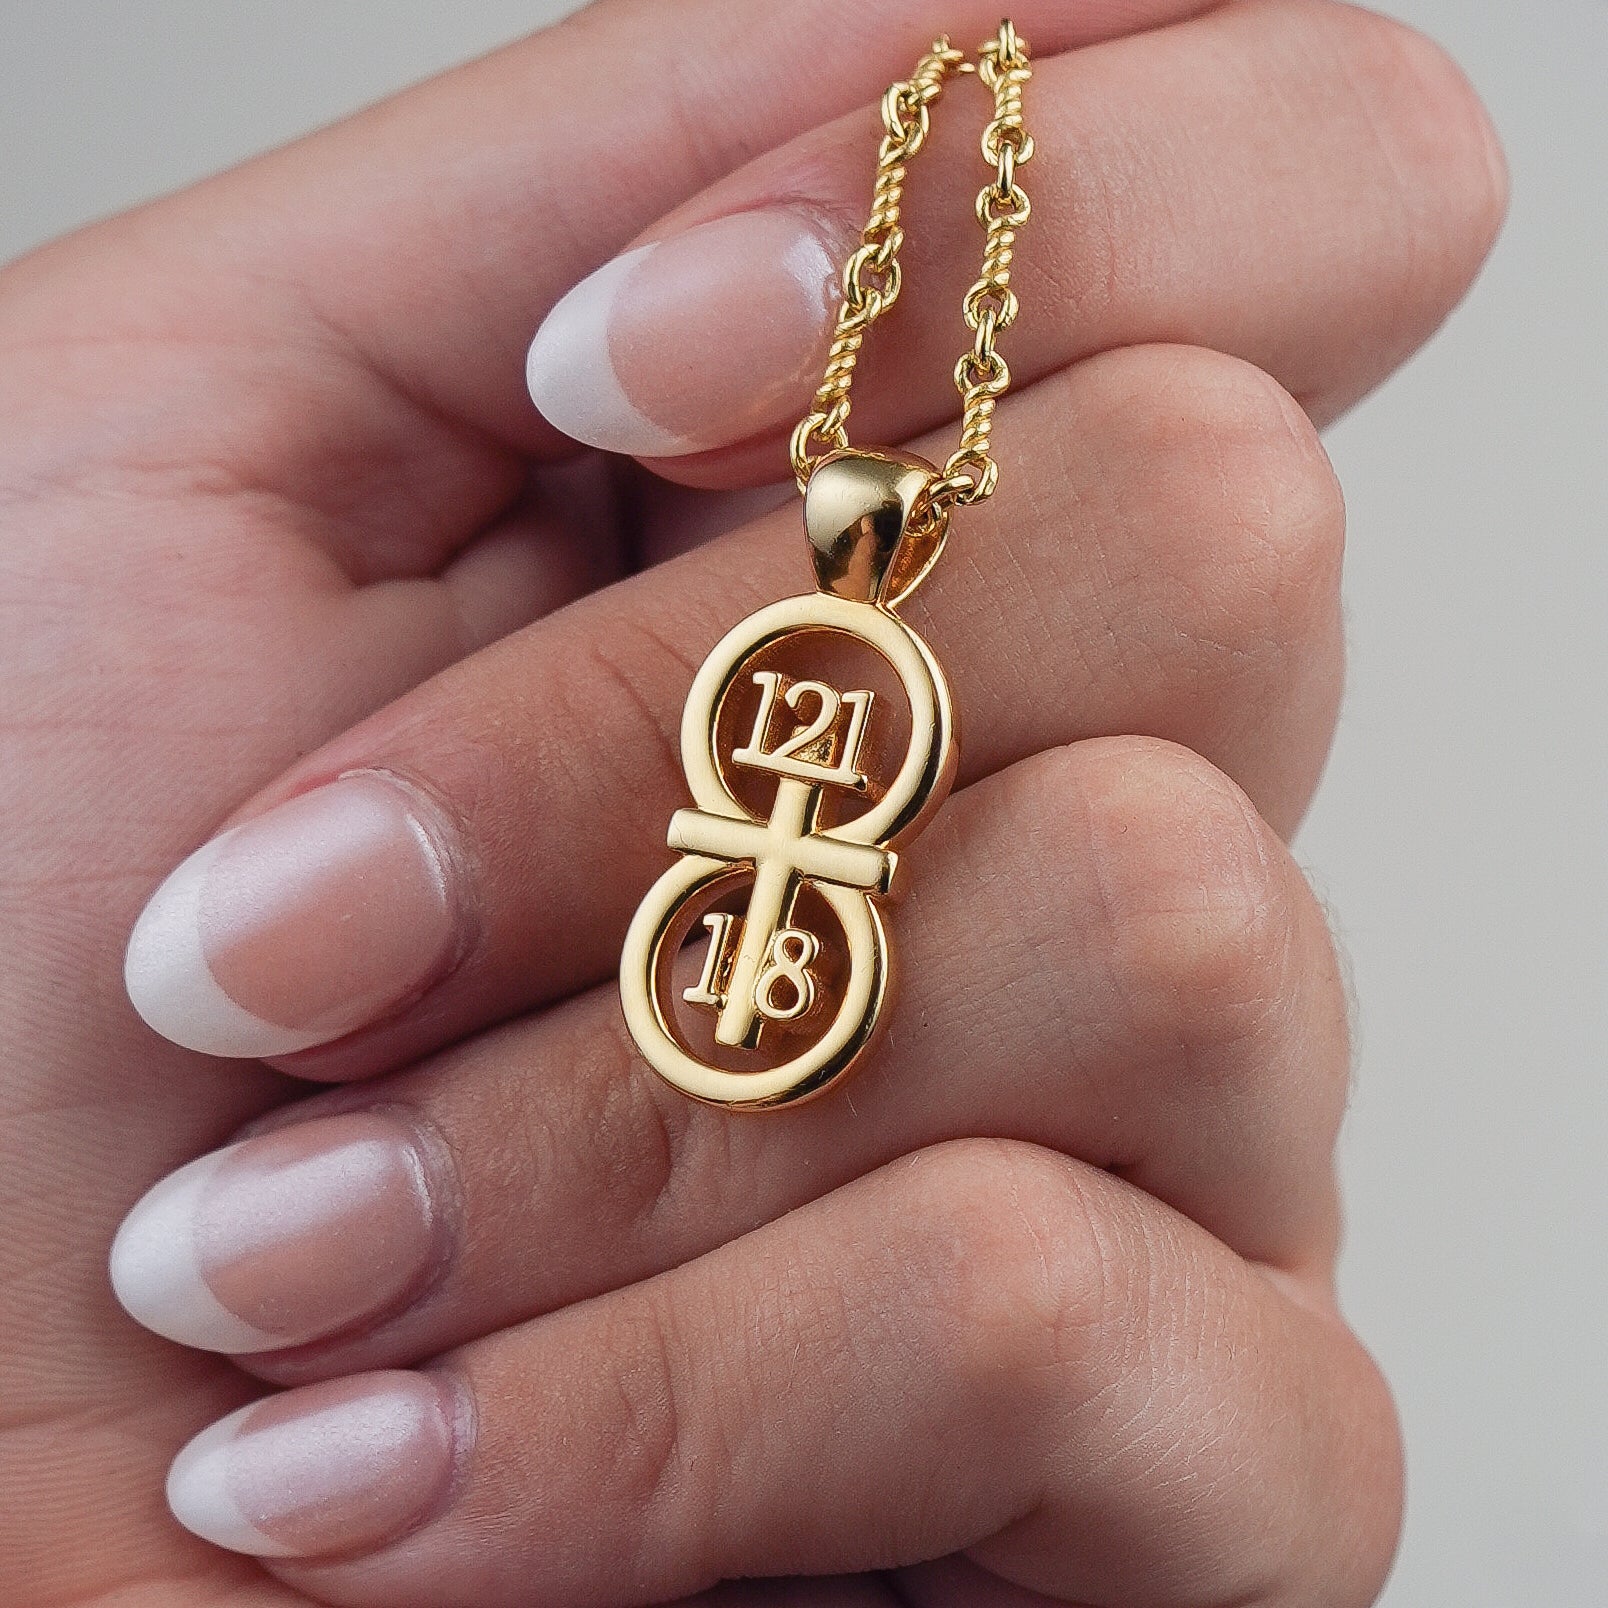 Our large pendant displayed draped over a hand with our 14k gold filled Rolo chain.  The RIYAN 29 and 11® pendant has the numbers 121, 1, and 8 intertwined with the cross to represent Psalm 121:1-8 with the chapter word "Psalm" inscribed on the back.